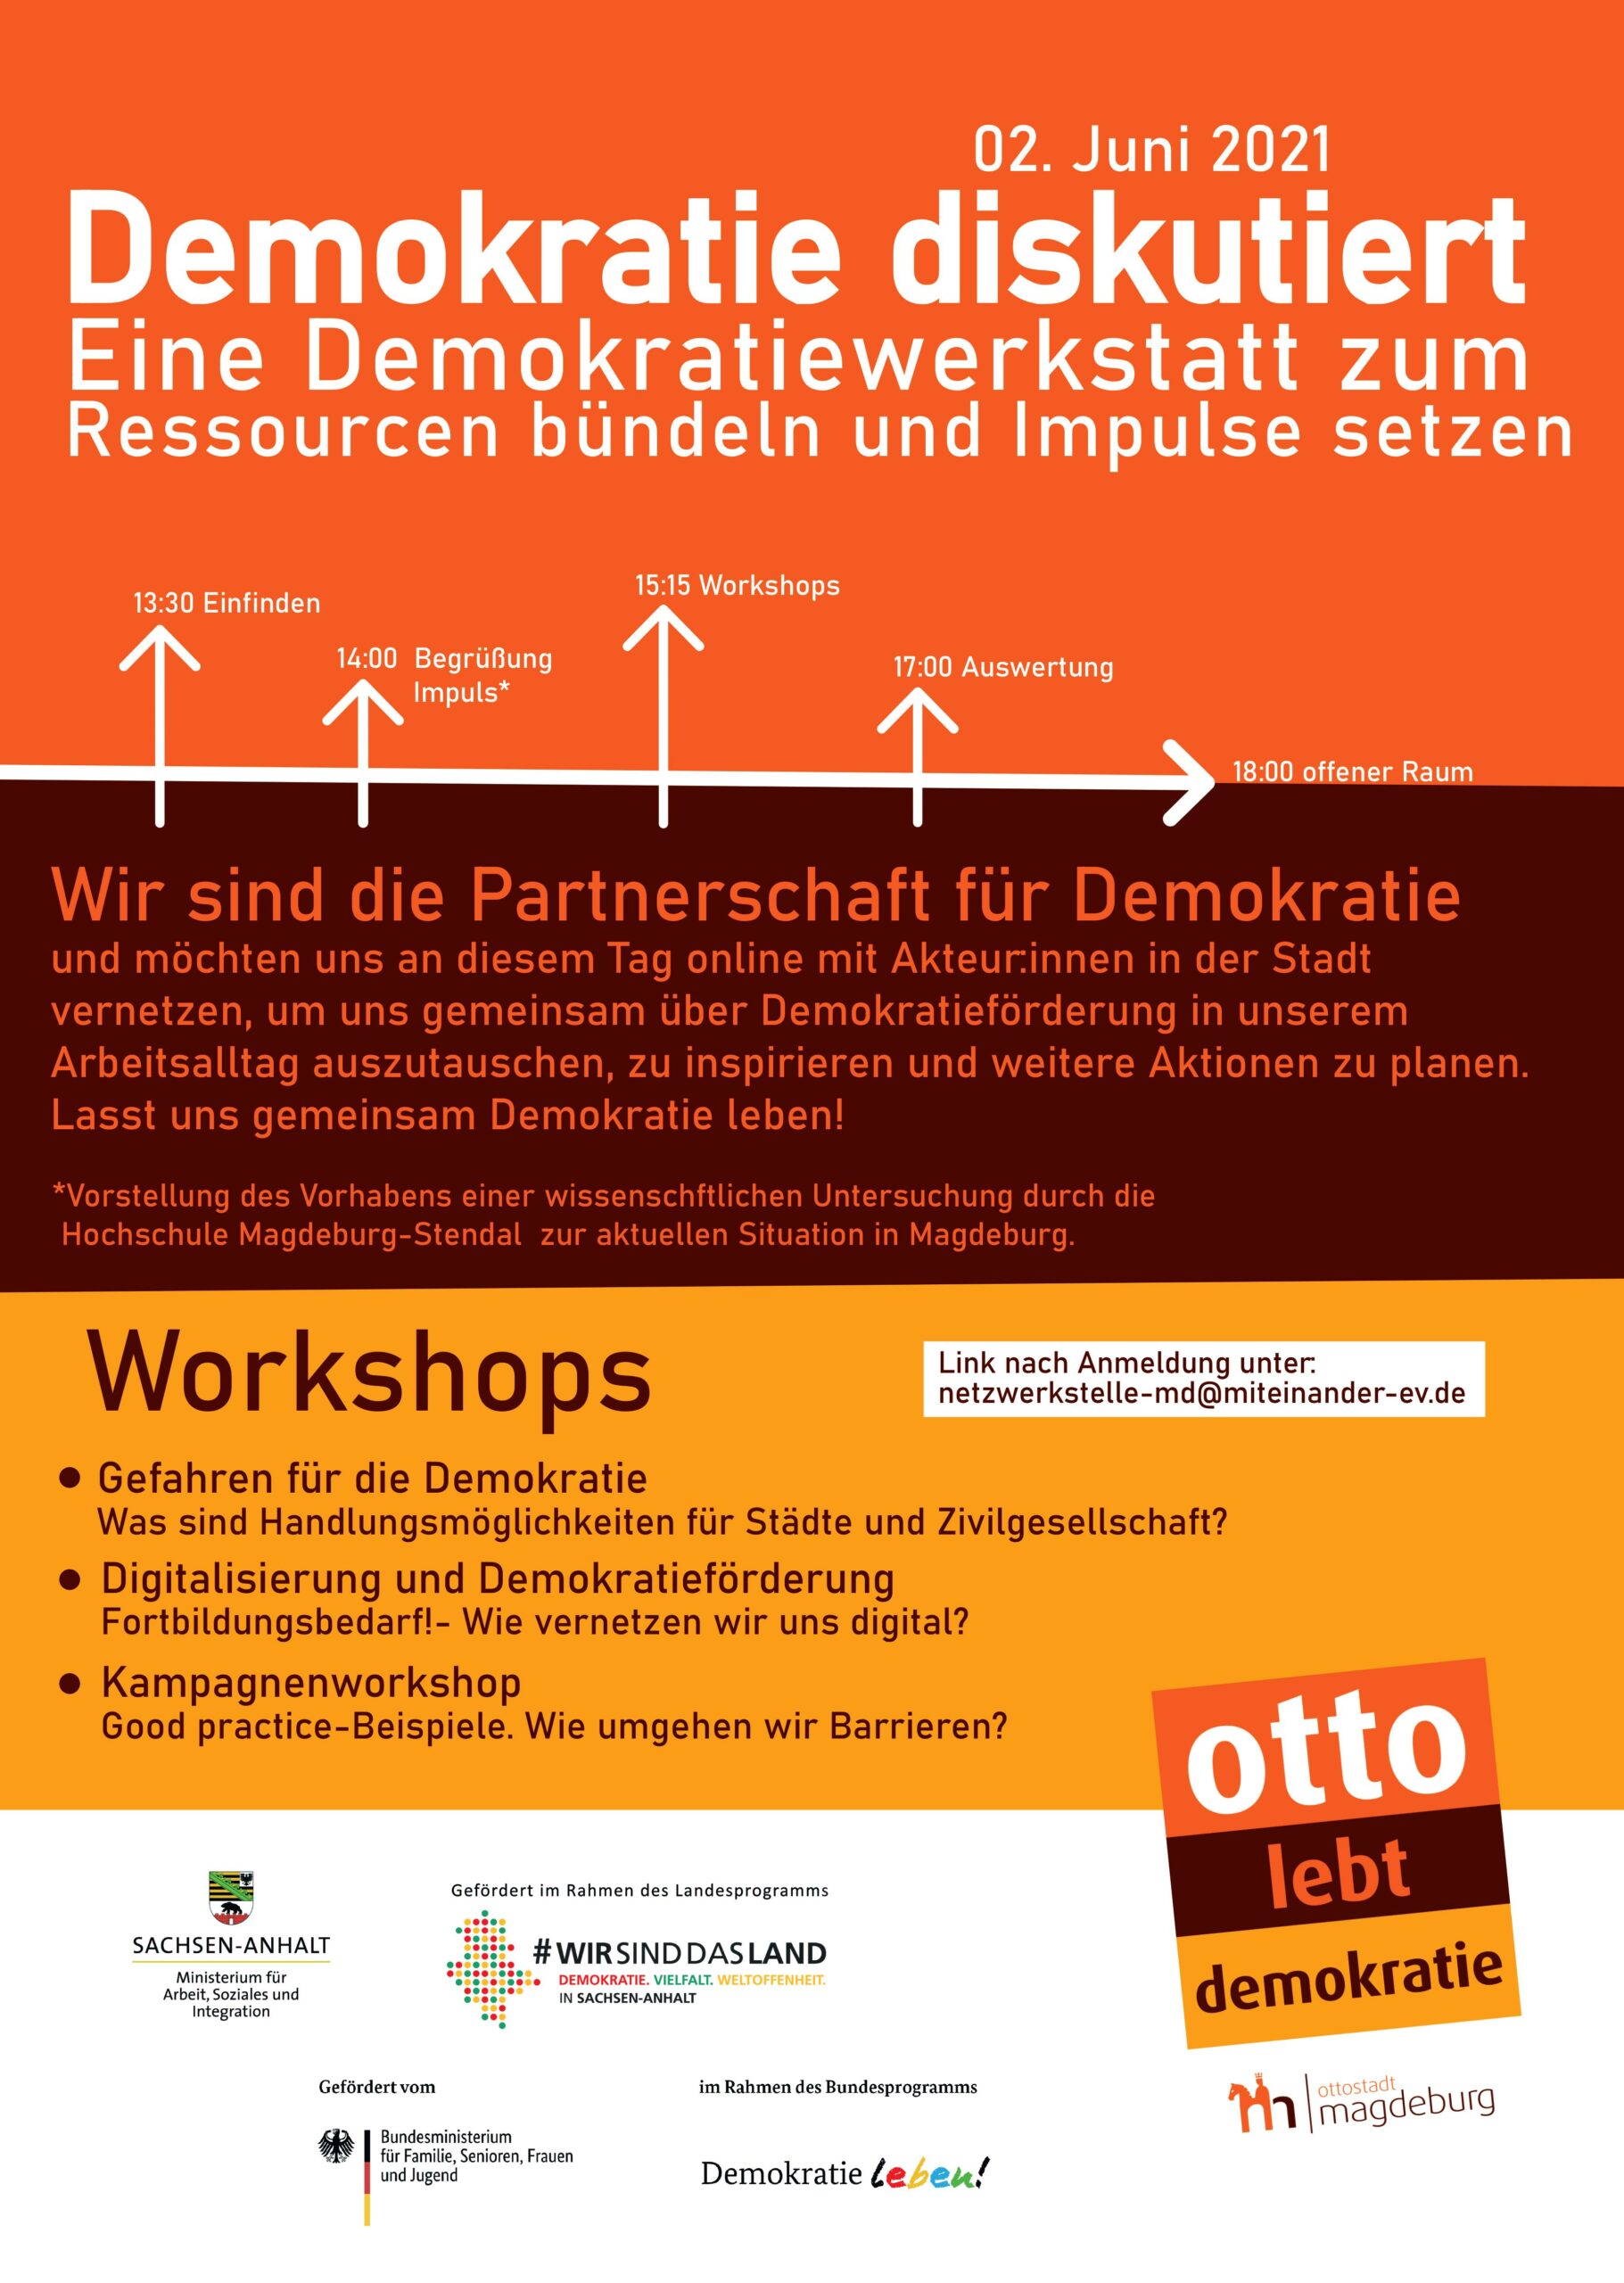 Announcement to the democracy conference on 2 June in Magdeburg